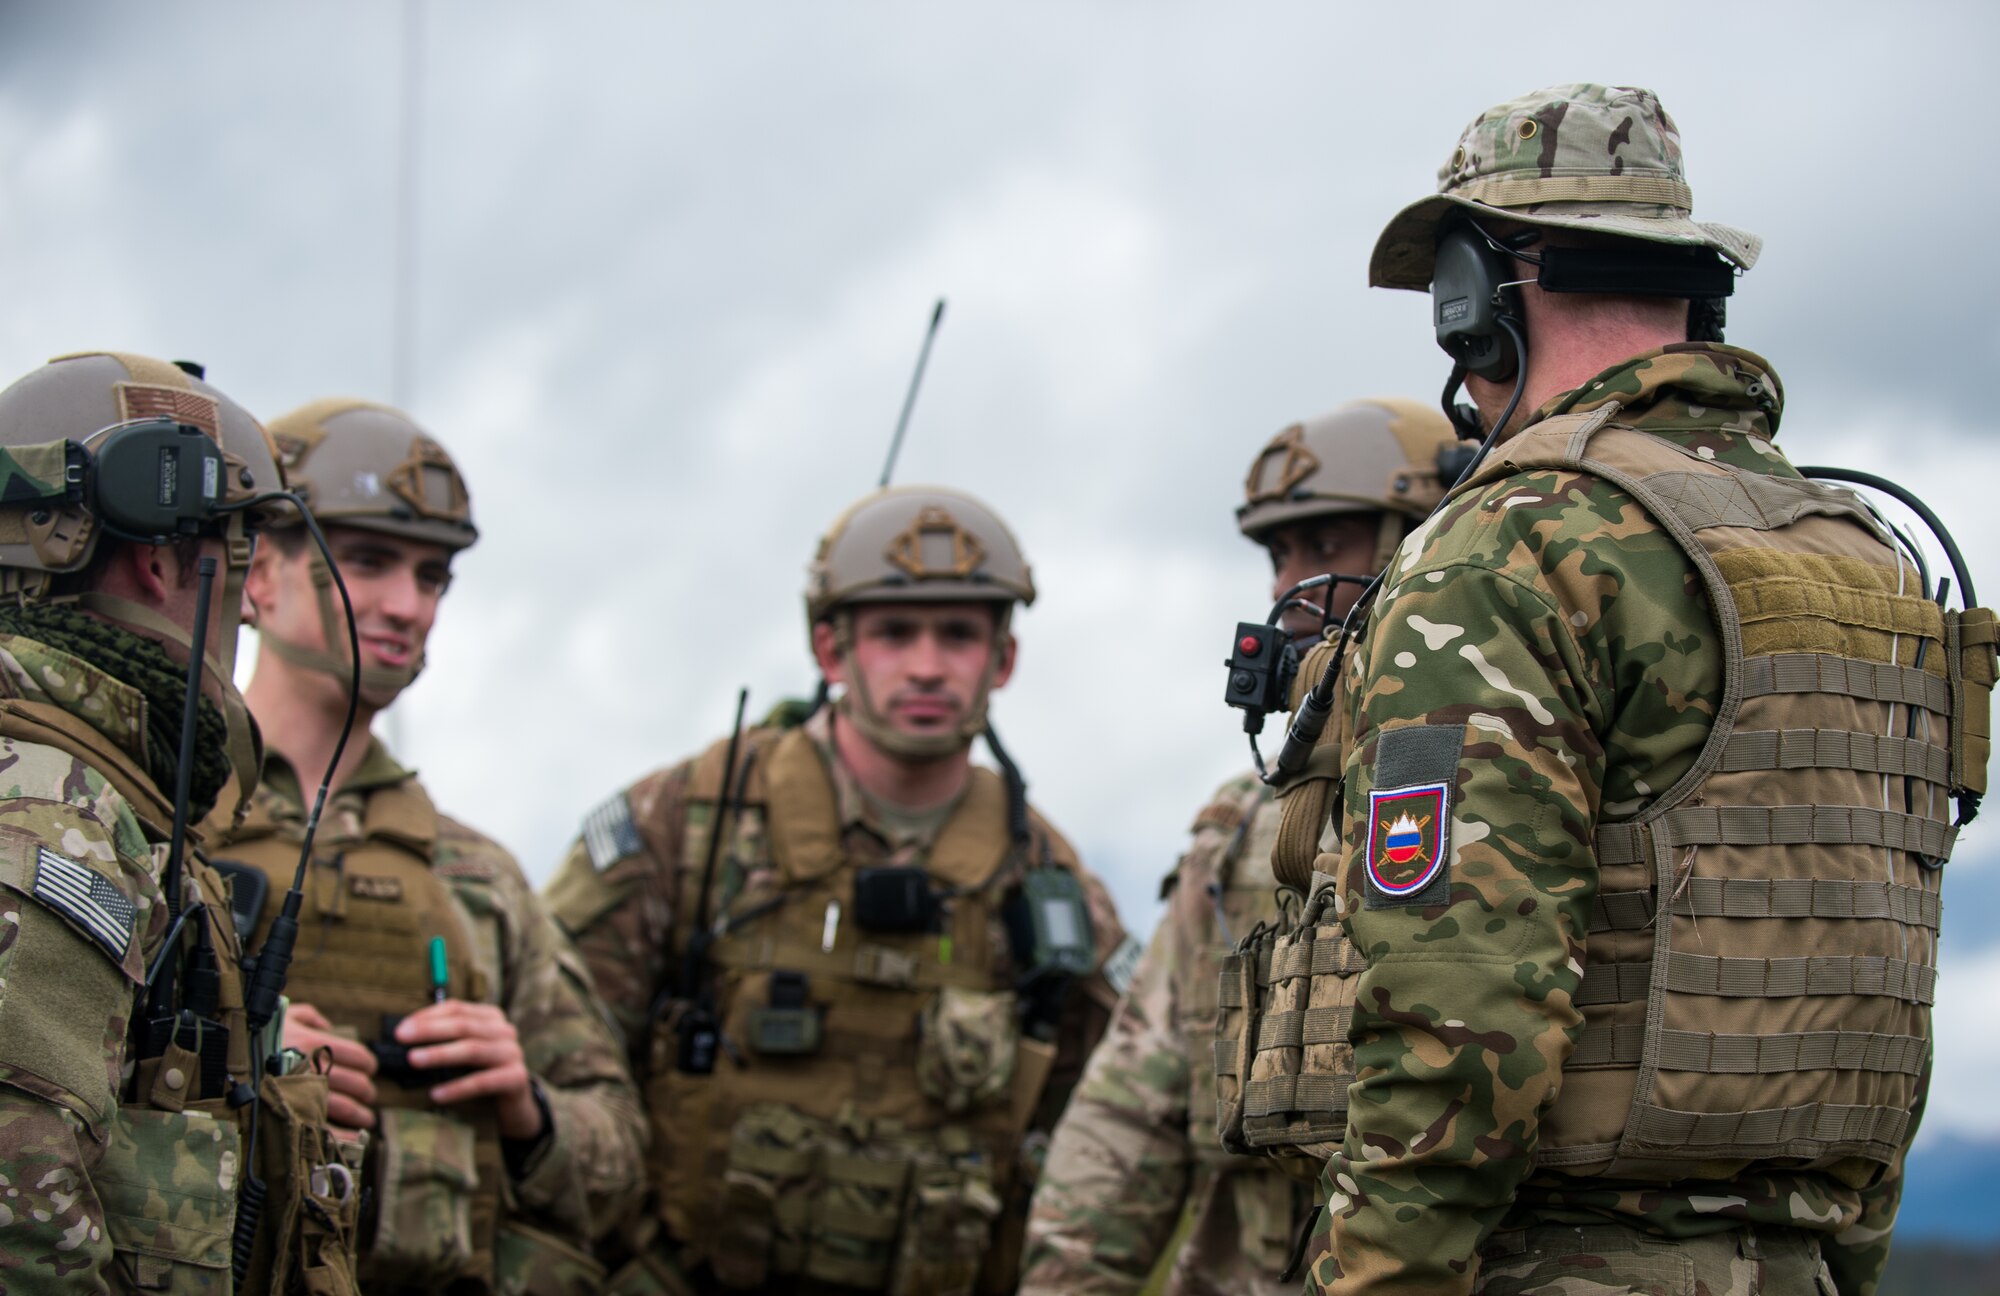 Joint terminal attack controllers from the U.S. and Slovenian militaries discuss a bombing run by a Slovenian PC-9M Hudournik aircraft, during exercise Rock Proof V Oct. 16, 2015, at Pocek Training Range, near Postojna, Slovenia. The JTACs joined U.S. Soldiers from the 2nd Battalion, 503rd Infantry Regiment to provide close air support during the live-fire training. (U.S. Air Force photo/ Staff Sgt. Armando A. Schwier-Morales)